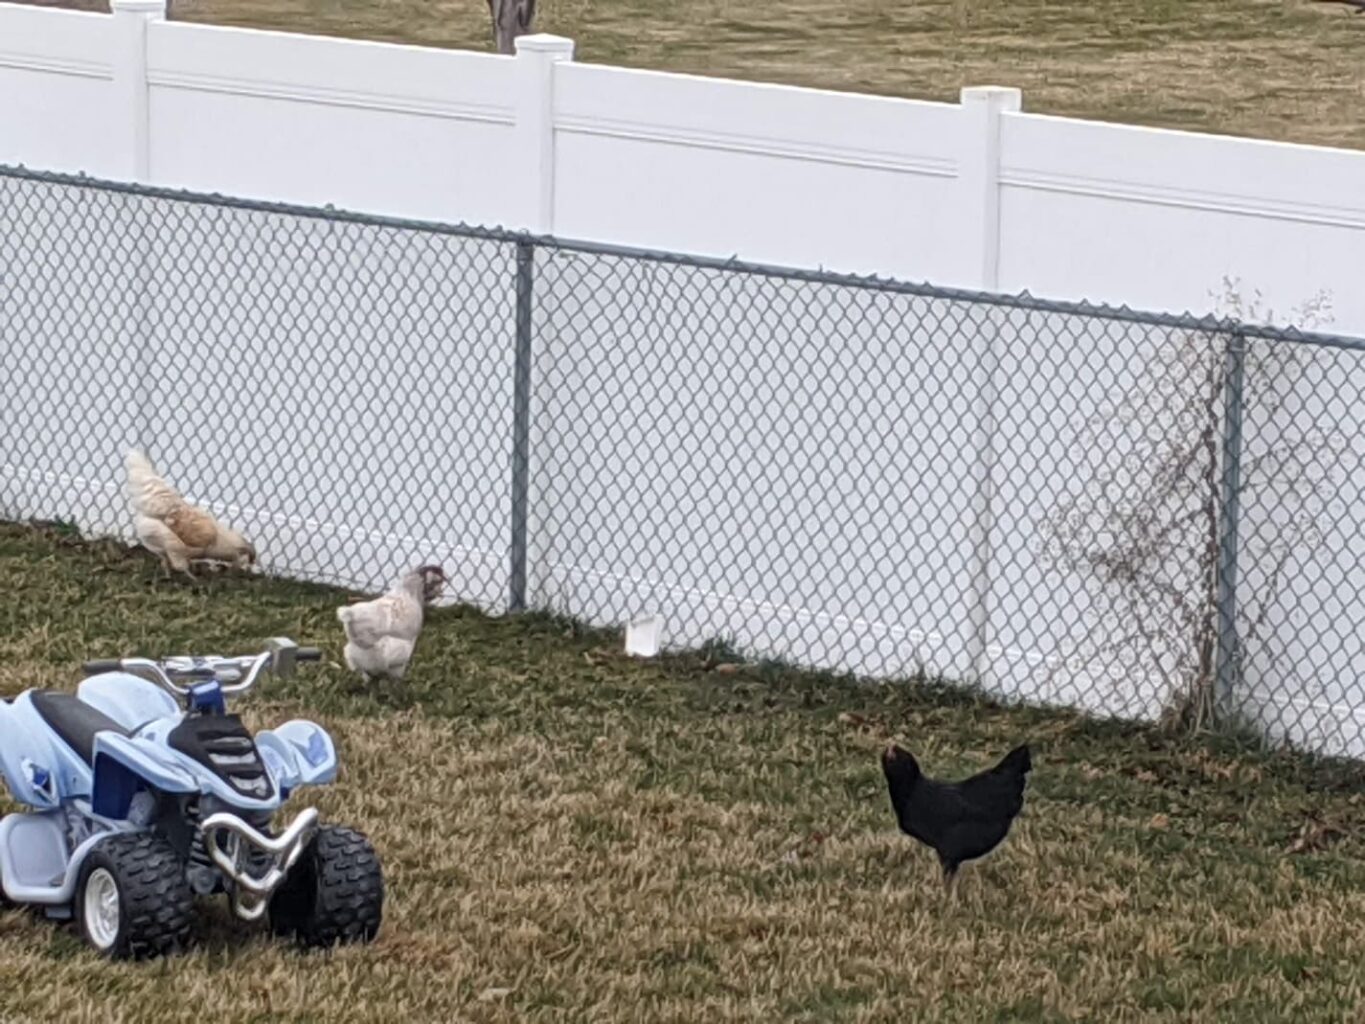 An image of chickens playing in the yard.